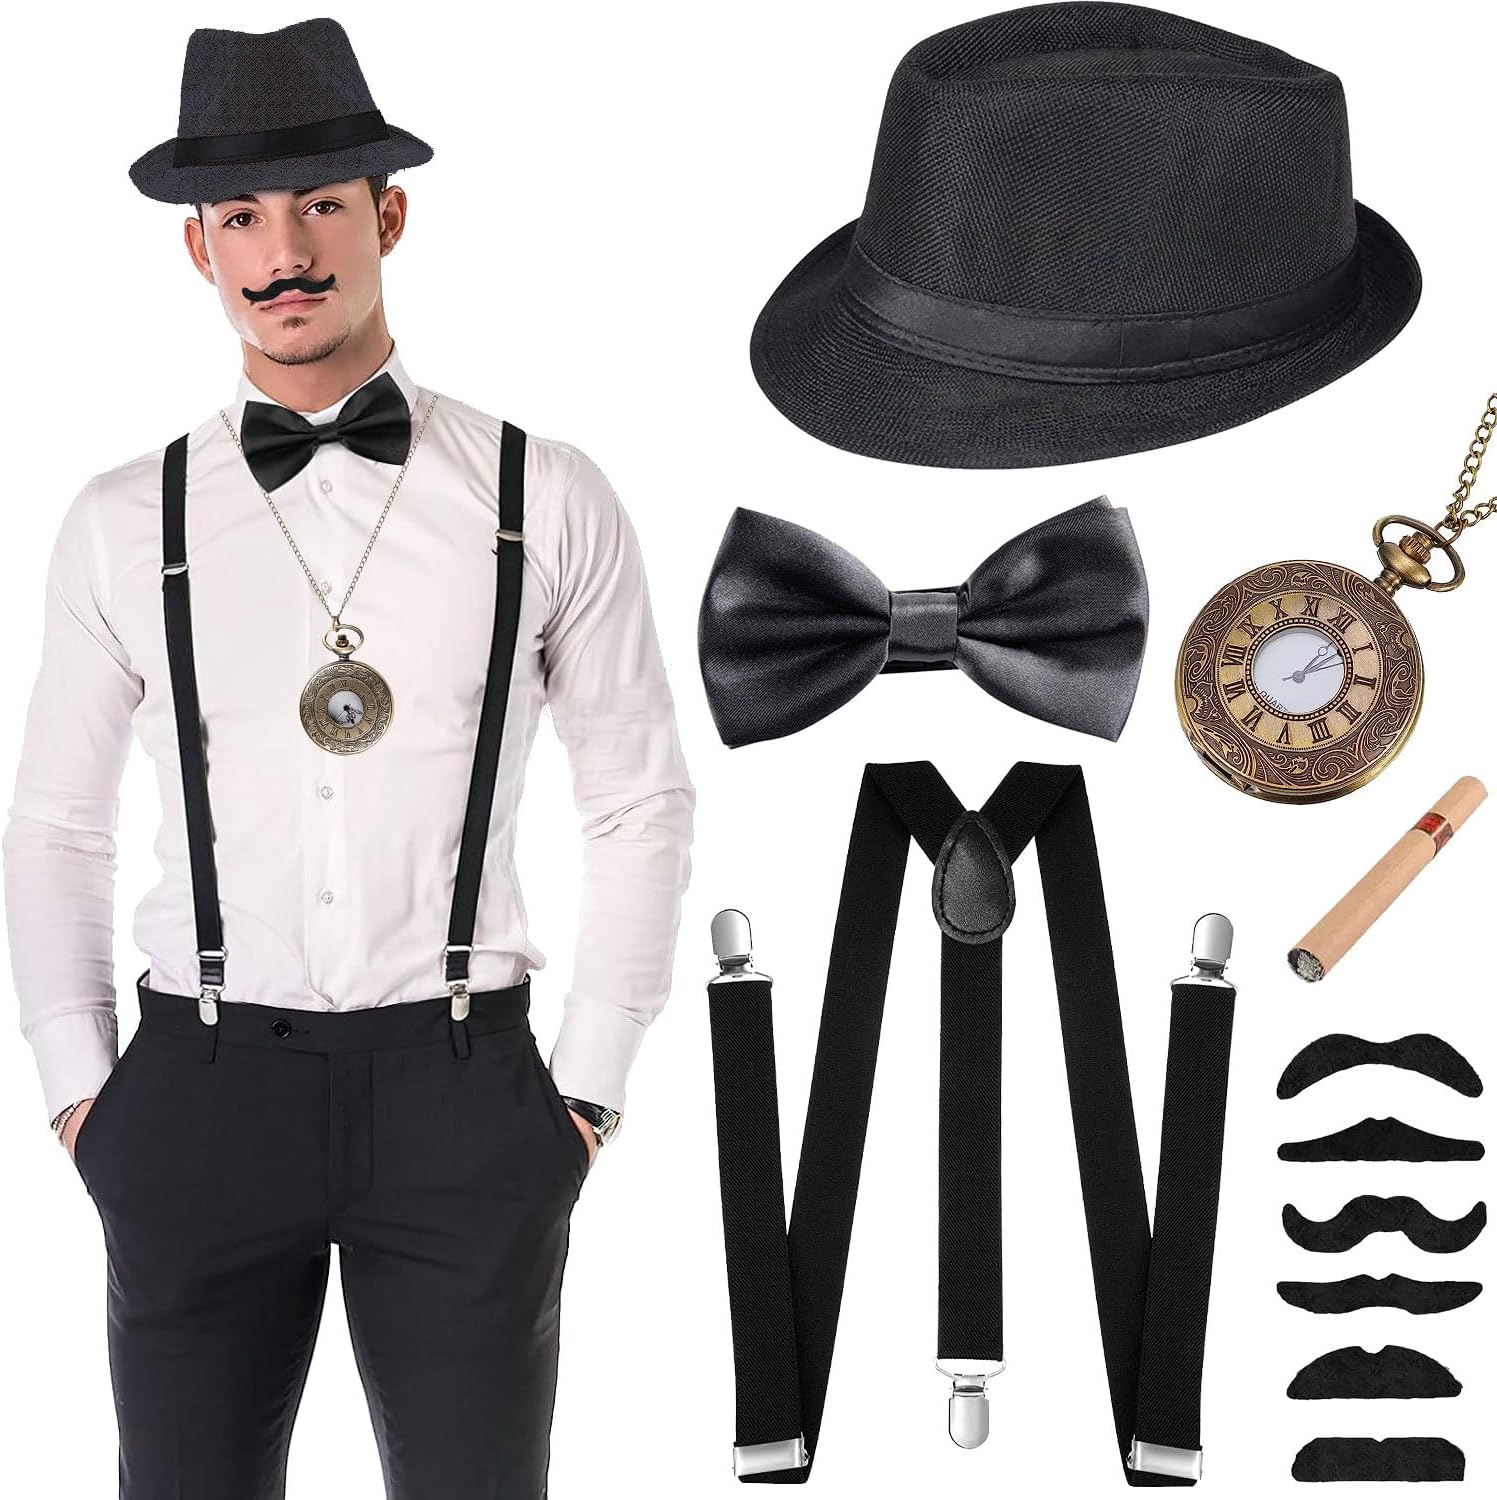 A detailed close-up of a Gatsby costume for men outfit